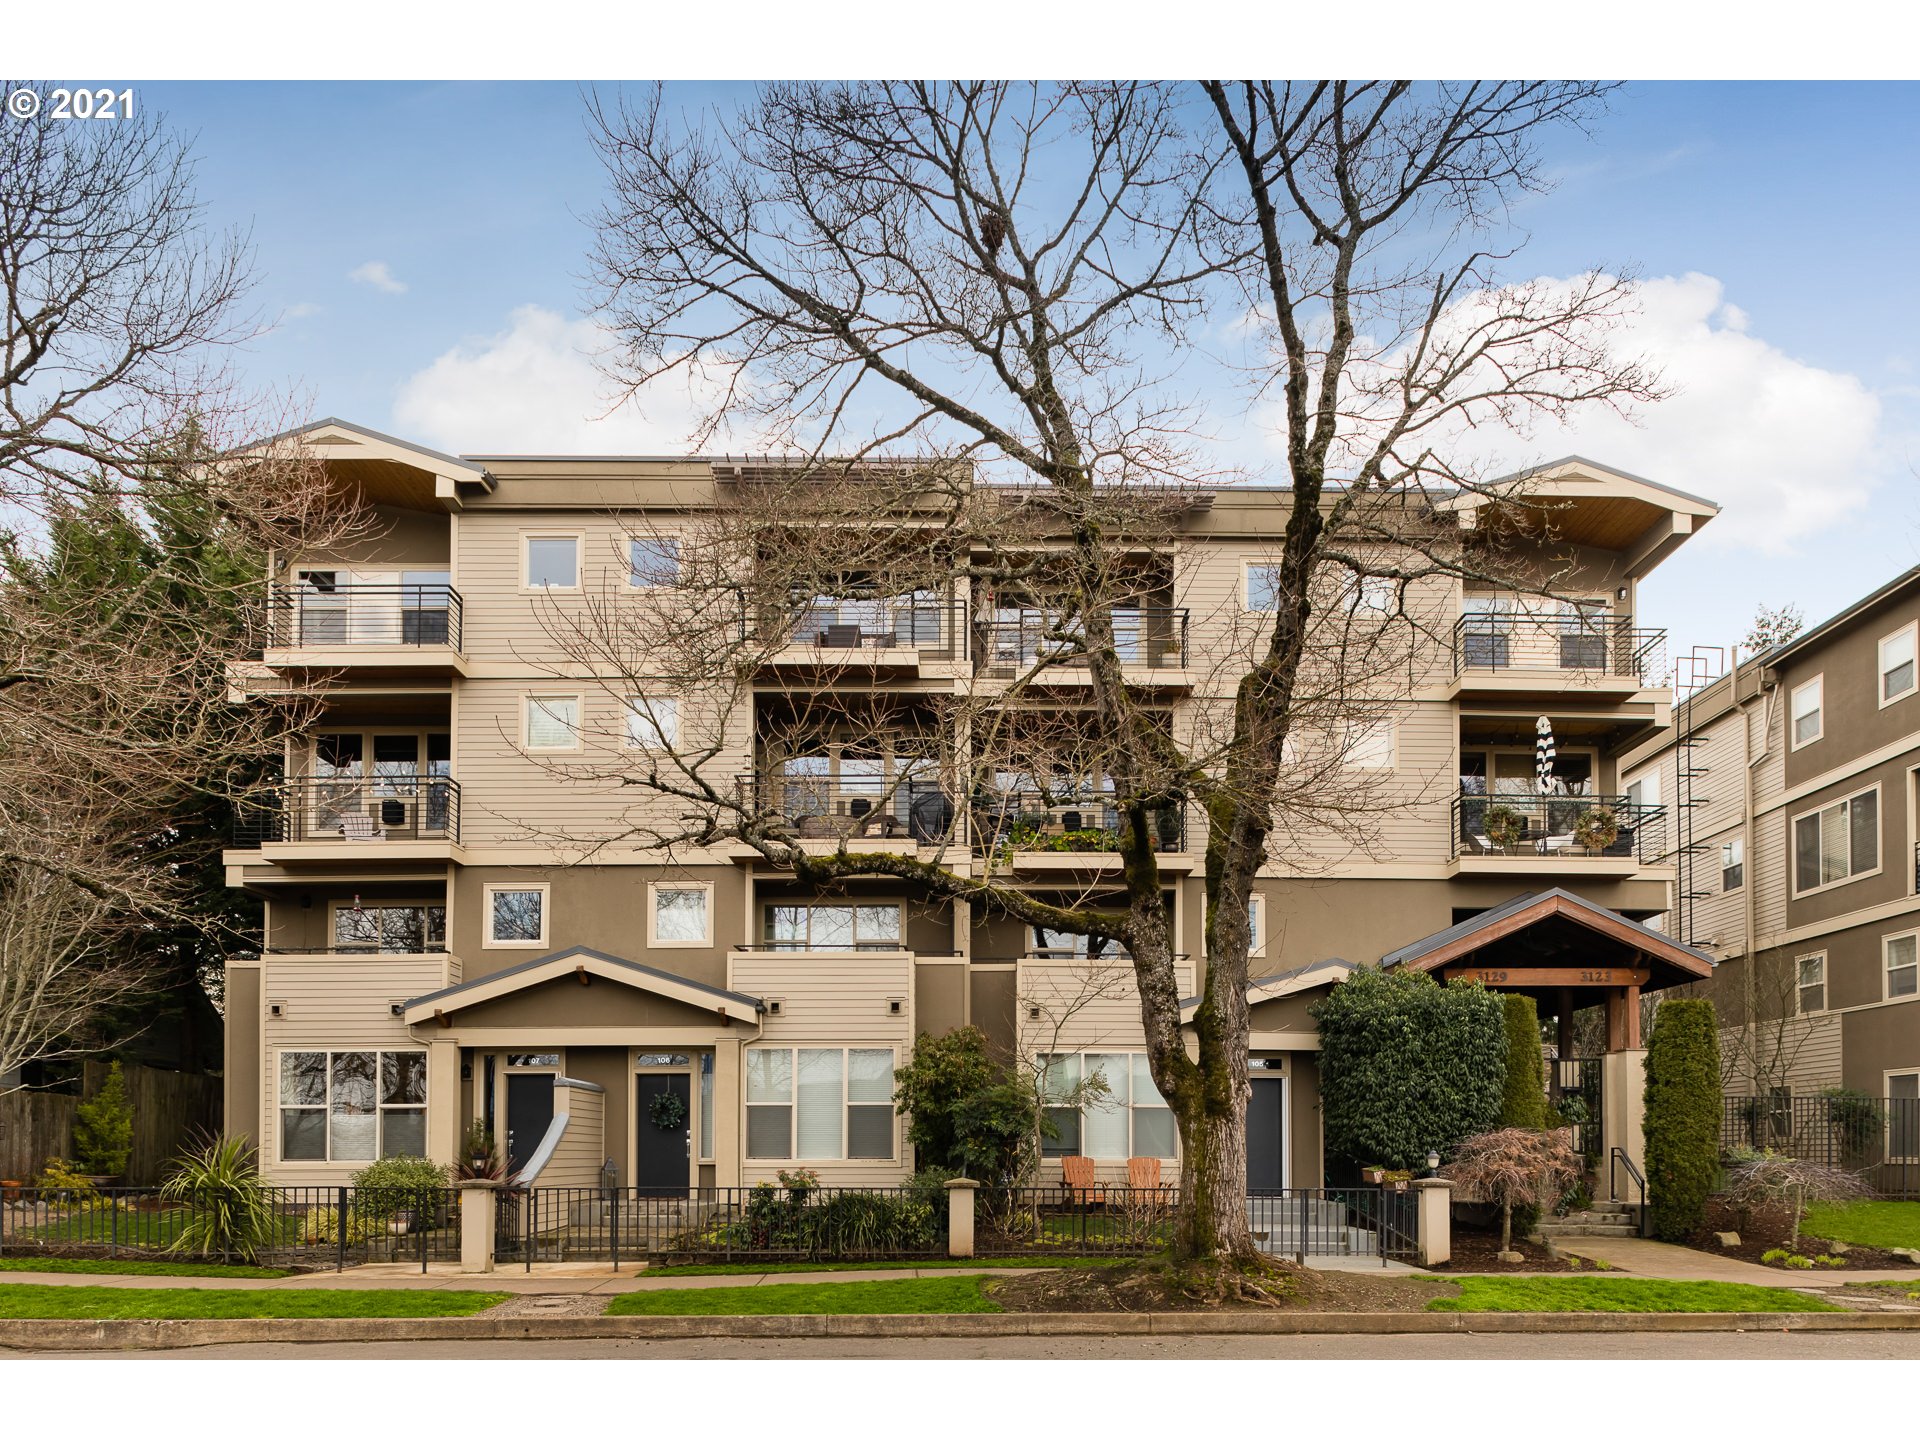 More Details about MLS # 21144490 : 3129 N WILLAMETTE BLVD 207